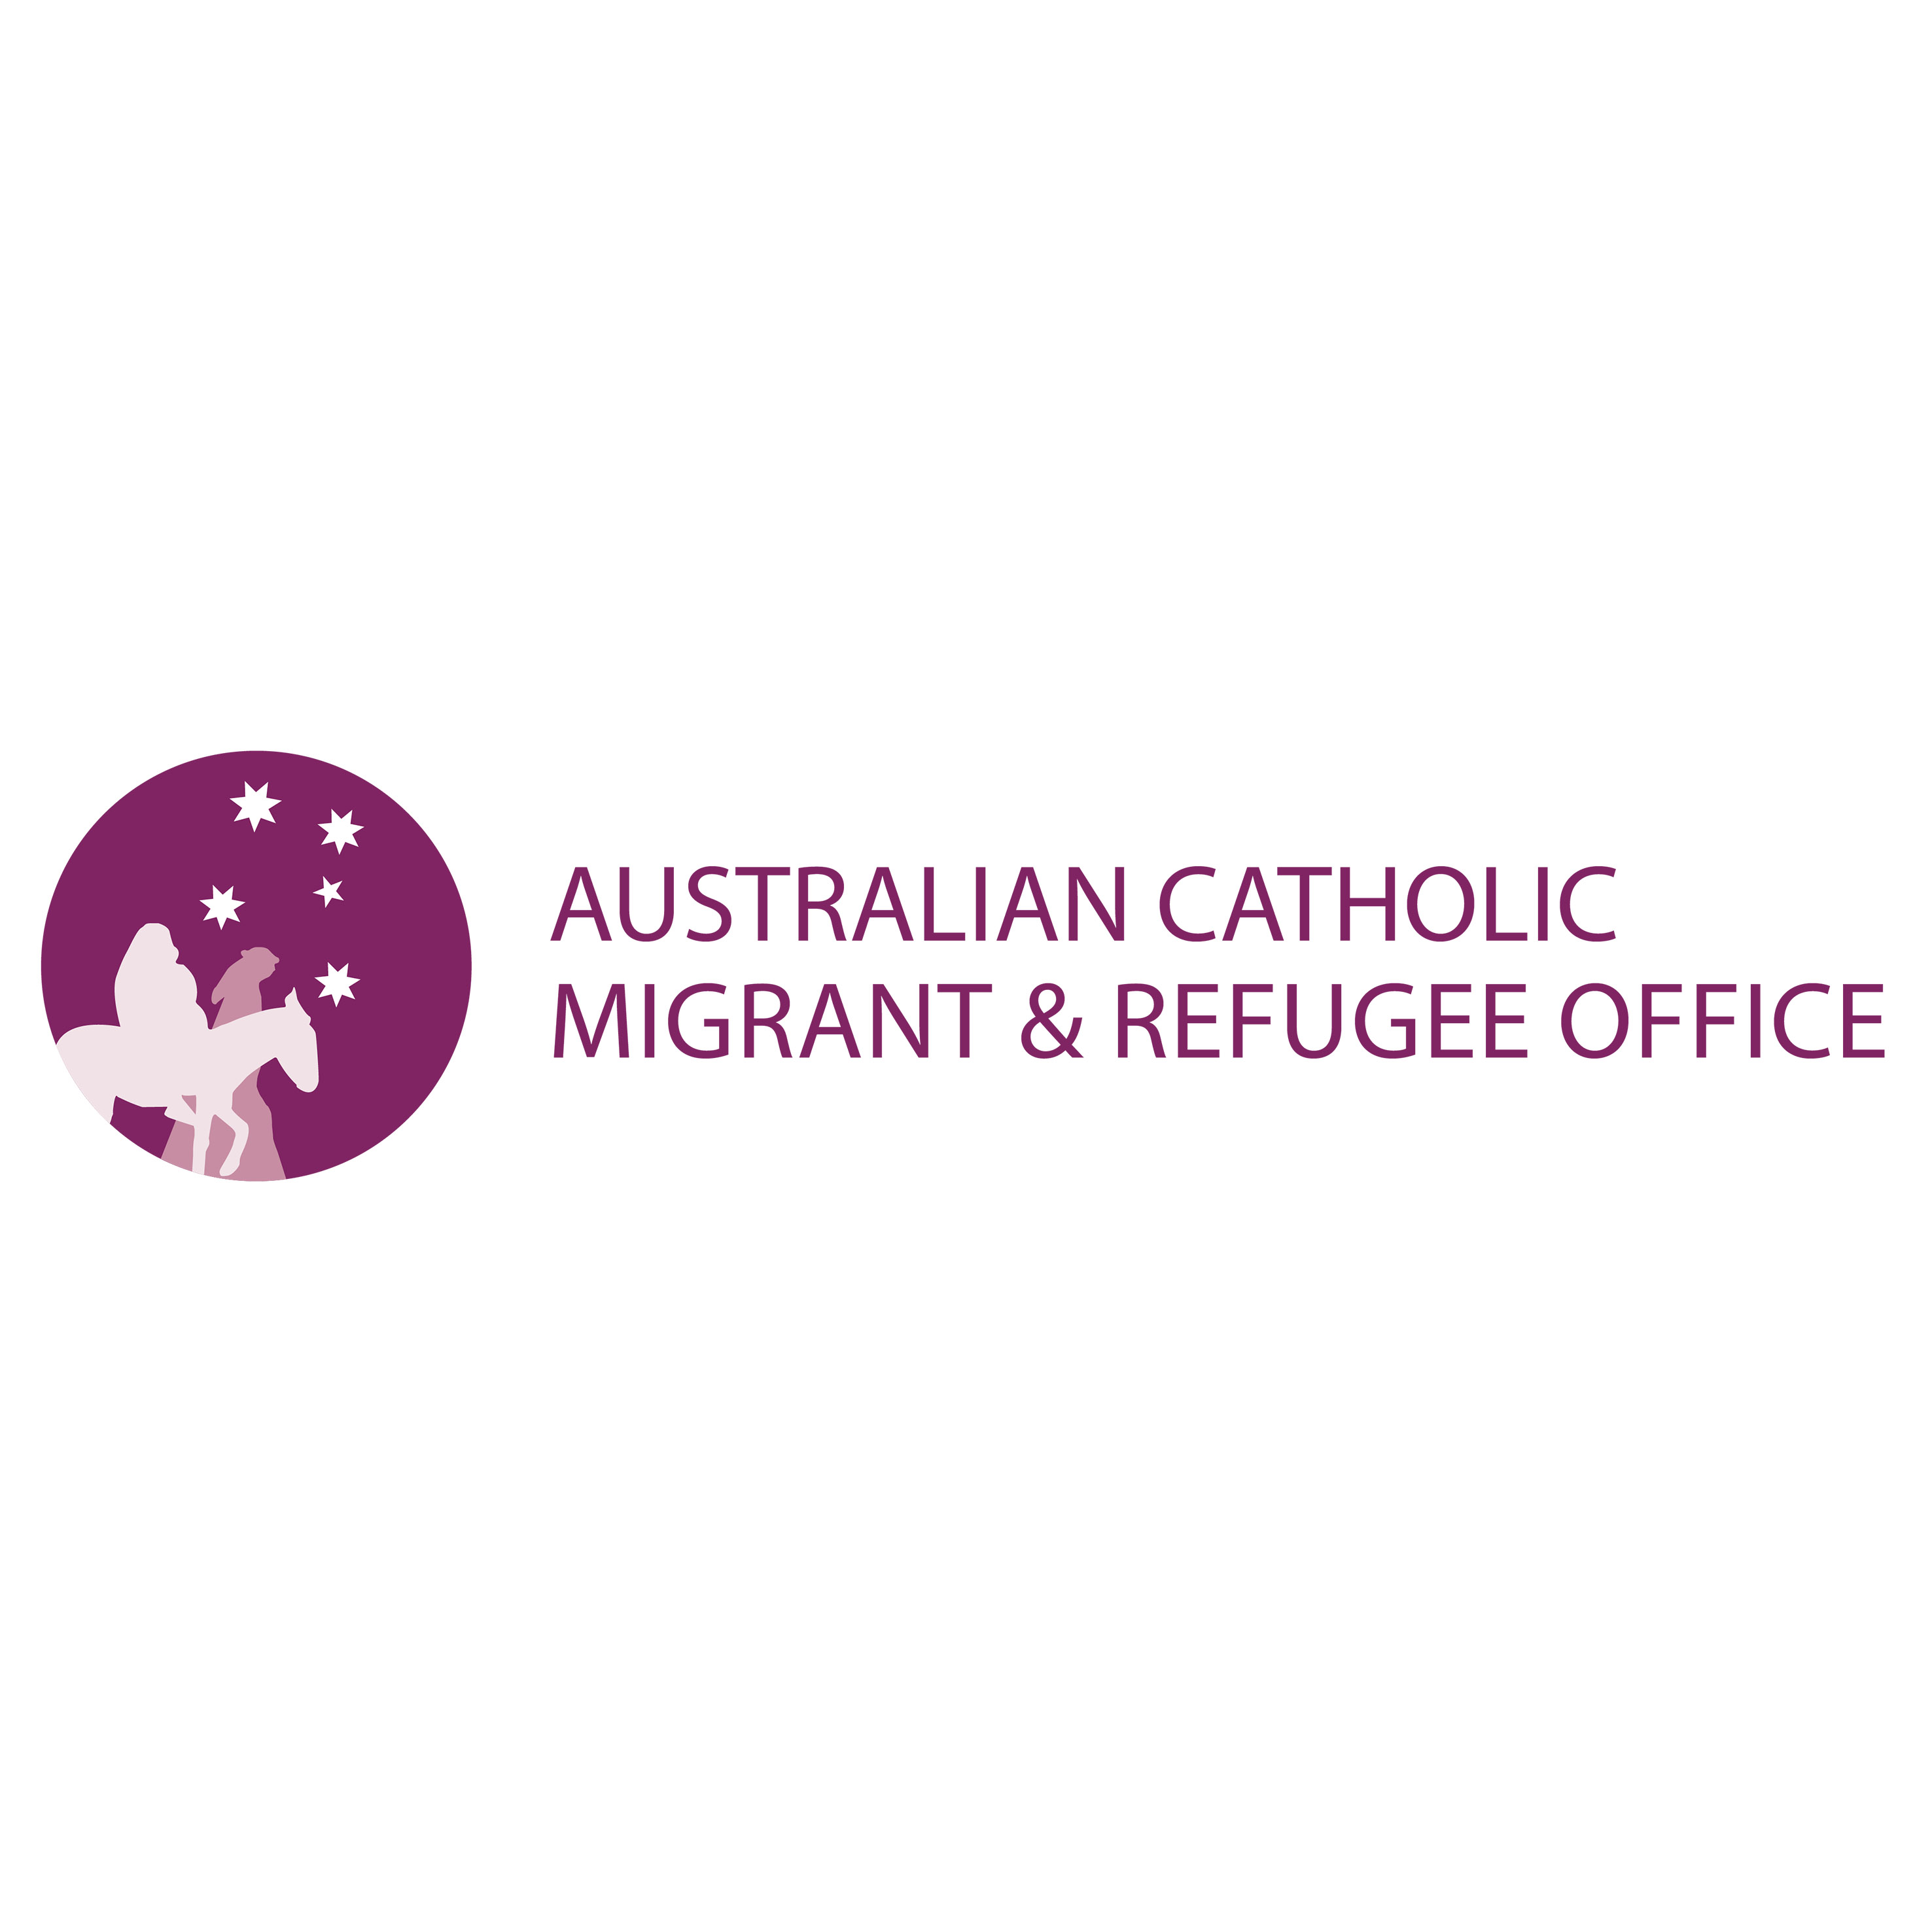 Resources for Migrant and Refugee Sunday published